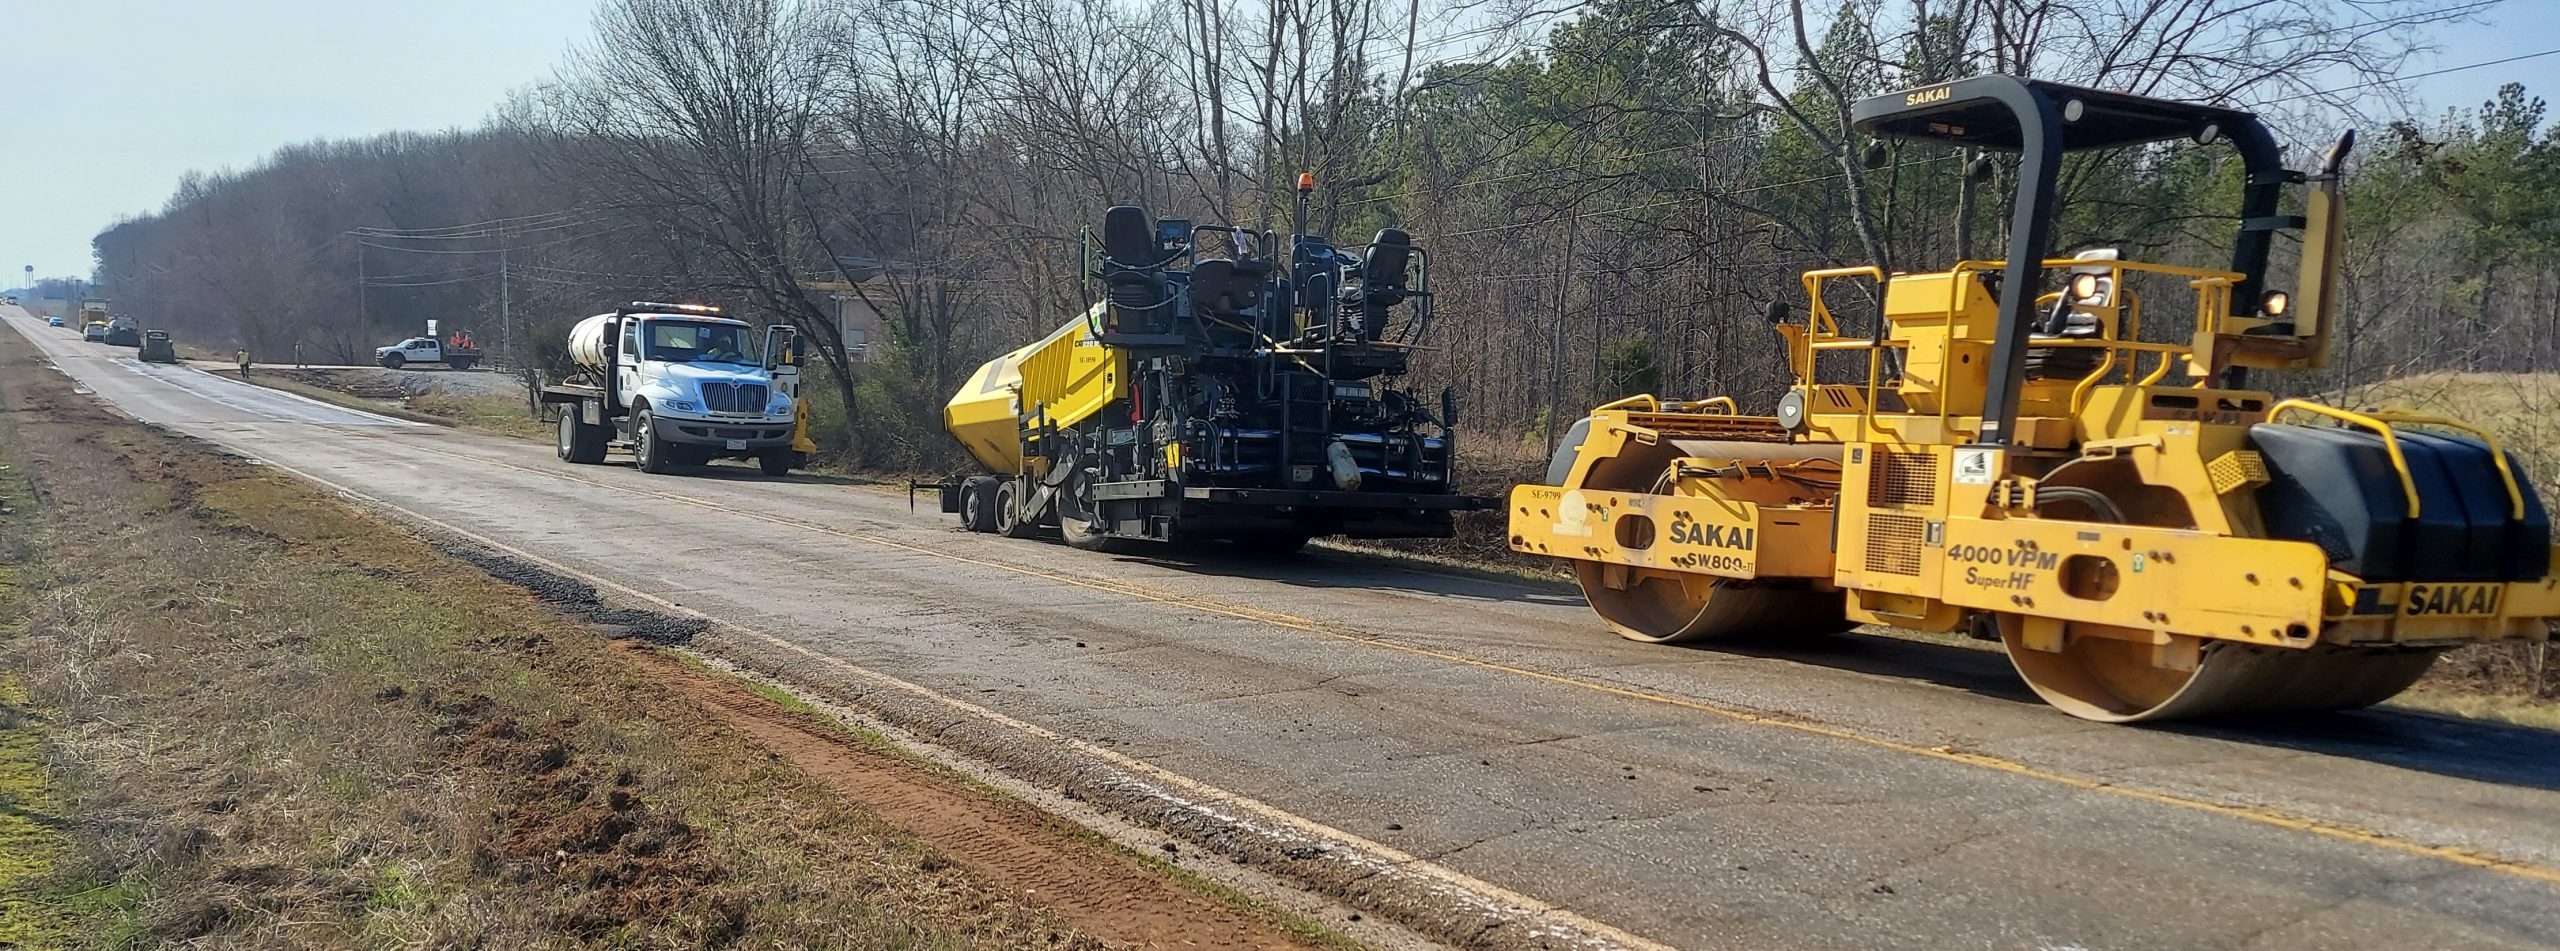 Equipment is lined up to pave a section of road where potholes had been patched.